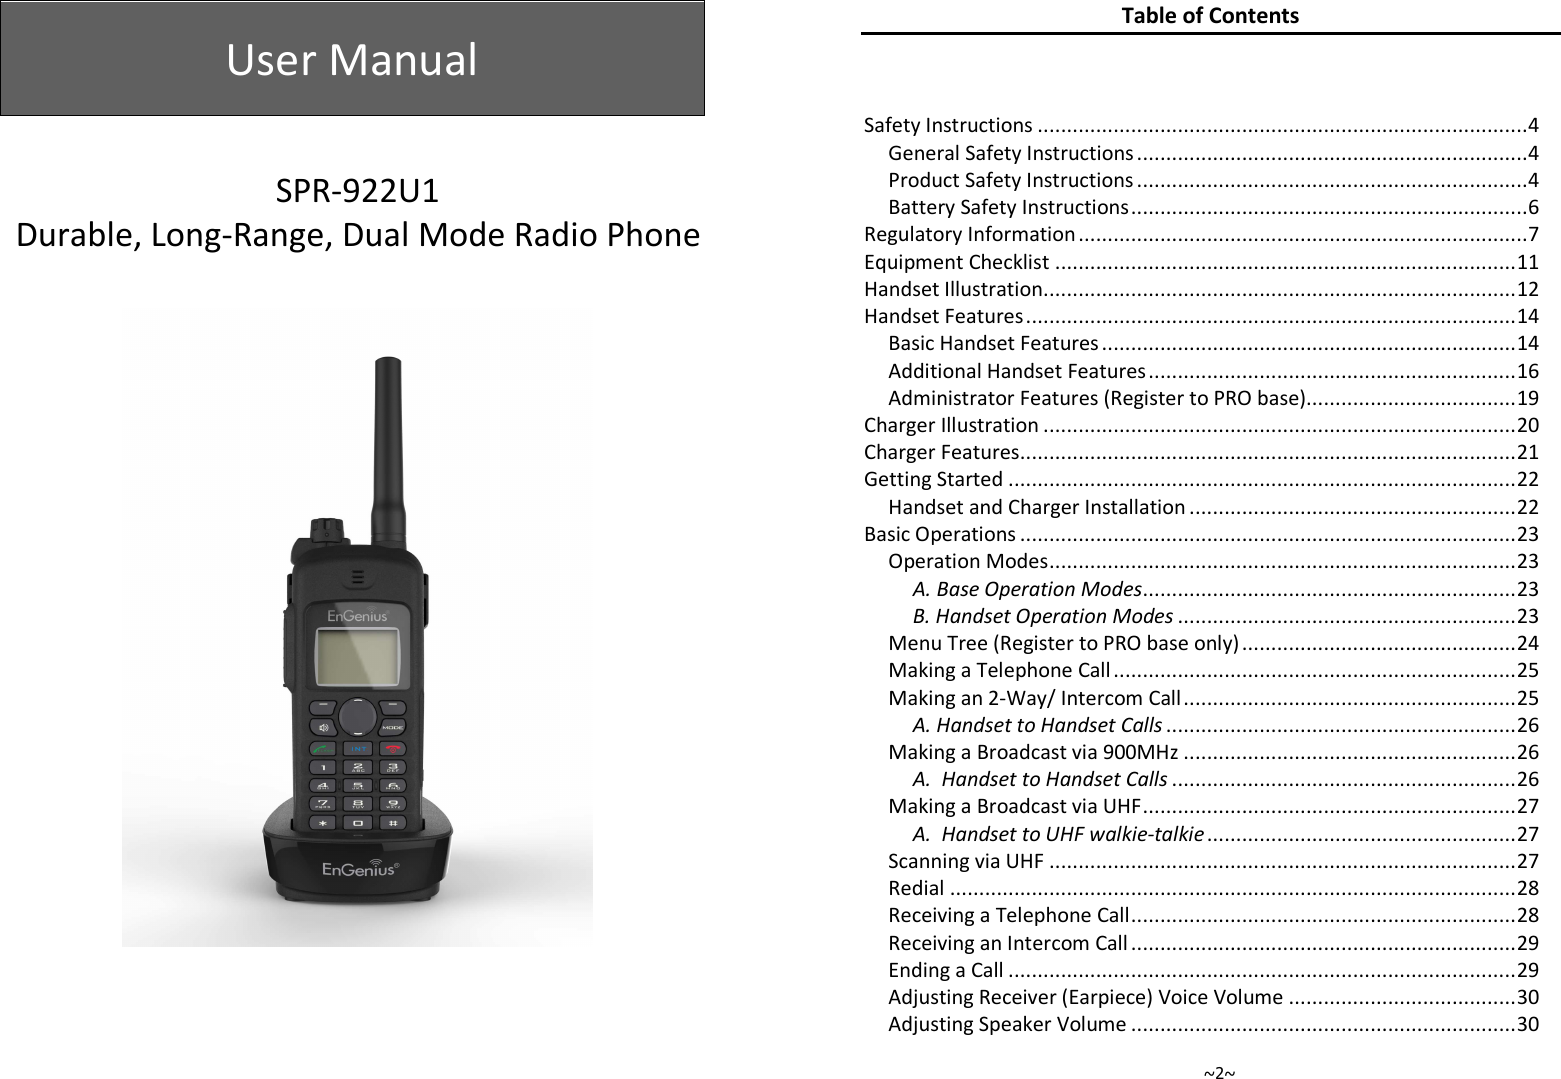  User Manual    SPR-922U1 Durable, Long-Range, Dual Mode Radio Phone        ~2~ Table of Contents  Safety Instructions .................................................................................... 4 General Safety Instructions ................................................................... 4 Product Safety Instructions ................................................................... 4 Battery Safety Instructions .................................................................... 6 Regulatory Information ............................................................................. 7 Equipment Checklist ............................................................................... 11 Handset Illustration ................................................................................. 12 Handset Features .................................................................................... 14 Basic Handset Features ....................................................................... 14 Additional Handset Features ............................................................... 16 Administrator Features (Register to PRO base).................................... 19 Charger Illustration ................................................................................. 20 Charger Features ..................................................................................... 21 Getting Started ....................................................................................... 22 Handset and Charger Installation ........................................................ 22 Basic Operations ..................................................................................... 23 Operation Modes ................................................................................ 23 A. Base Operation Modes ................................................................ 23 B. Handset Operation Modes .......................................................... 23 Menu Tree (Register to PRO base only) ............................................... 24 Making a Telephone Call ..................................................................... 25 Making an 2-Way/ Intercom Call ......................................................... 25 A. Handset to Handset Calls ............................................................ 26 Making a Broadcast via 900MHz ......................................................... 26 A.  Handset to Handset Calls ........................................................... 26 Making a Broadcast via UHF ................................................................ 27 A.  Handset to UHF walkie-talkie ..................................................... 27 Scanning via UHF ................................................................................ 27 Redial ................................................................................................. 28 Receiving a Telephone Call .................................................................. 28 Receiving an Intercom Call .................................................................. 29 Ending a Call ....................................................................................... 29 Adjusting Receiver (Earpiece) Voice Volume ....................................... 30 Adjusting Speaker Volume .................................................................. 30 